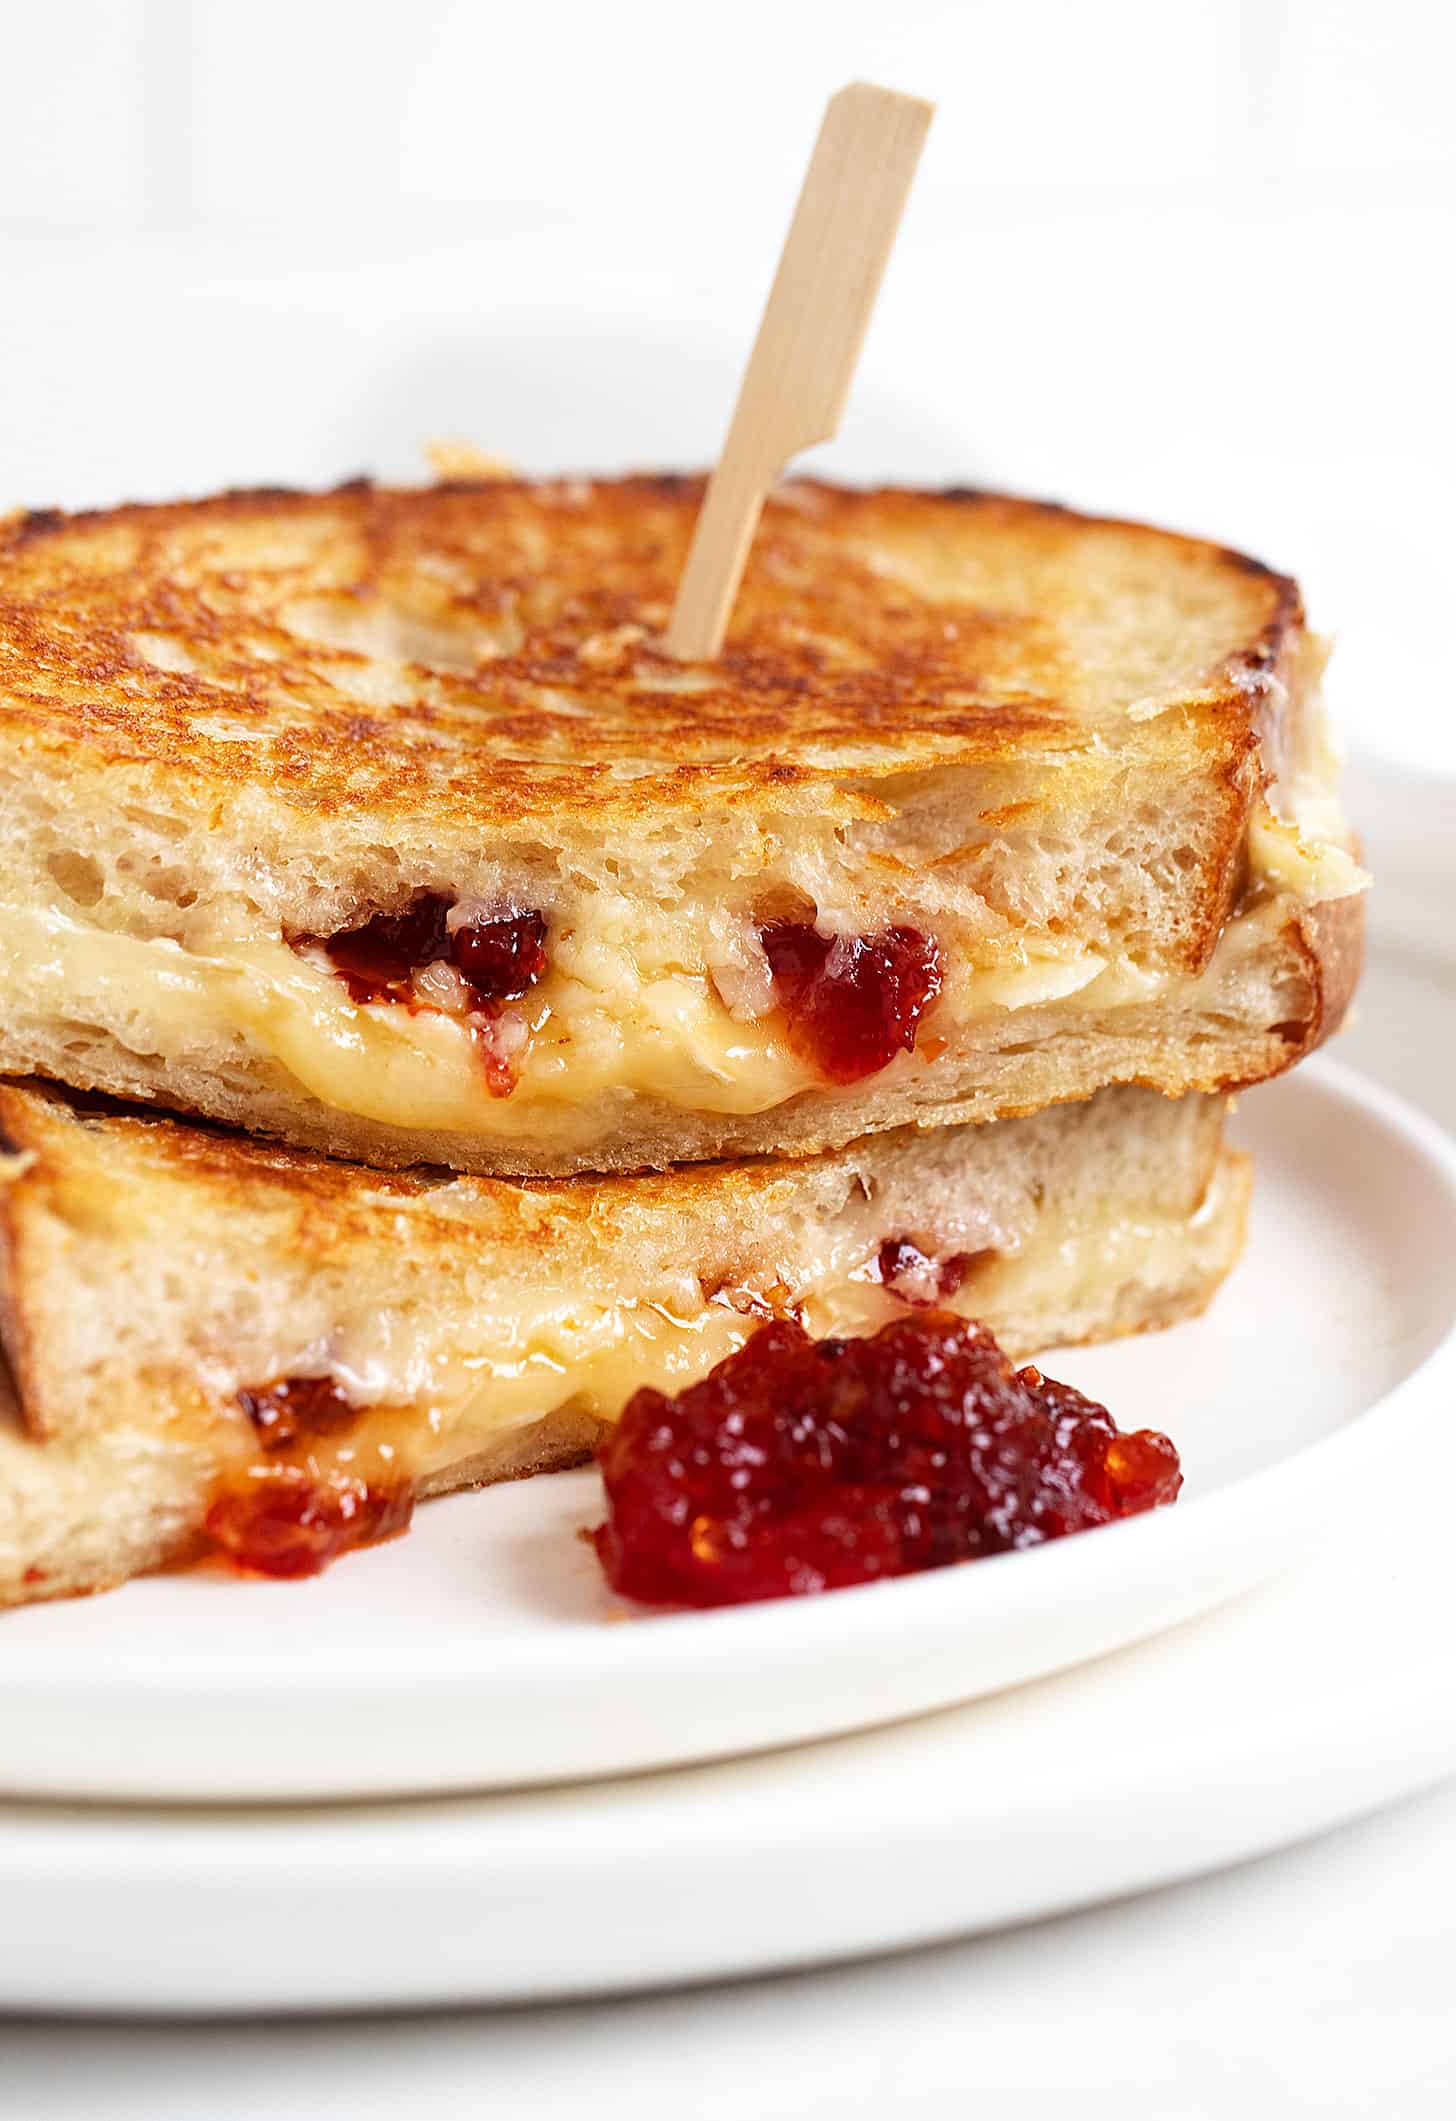 Brie grilled cheese on plate with red pepper jelly